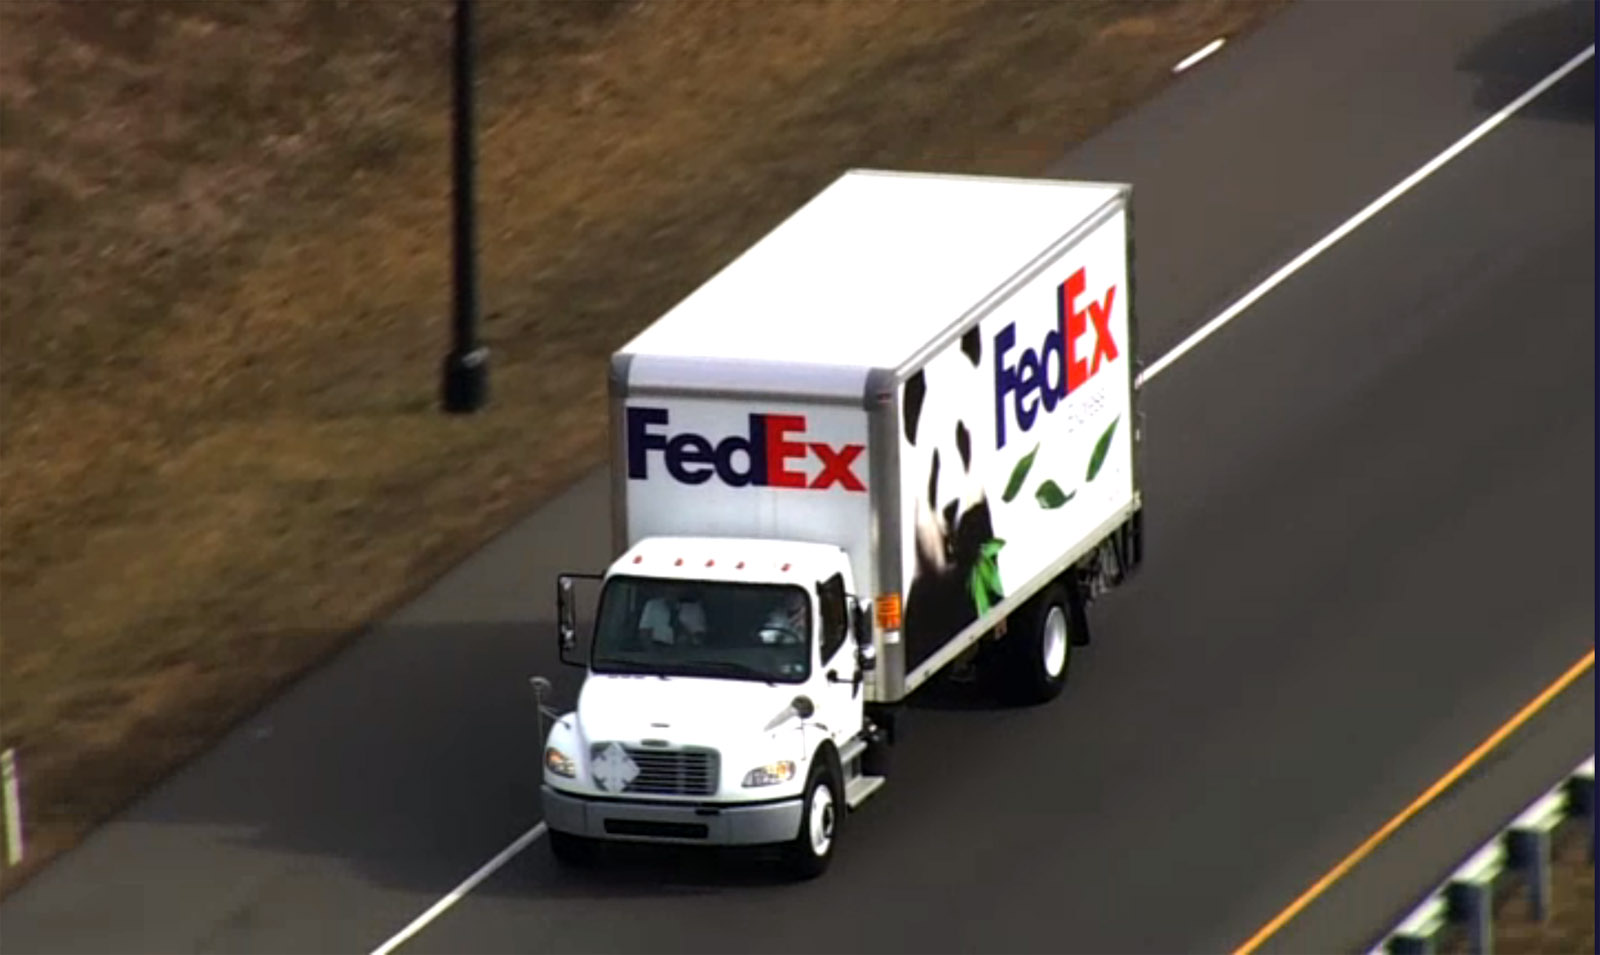 Giant panda Bao Bao travels by a FedEx truck to Dulles International Airport, where she will board a cargo plane bound for China on Tuesday, Feb. 21, 2017. (Courtesy NBC Washington)